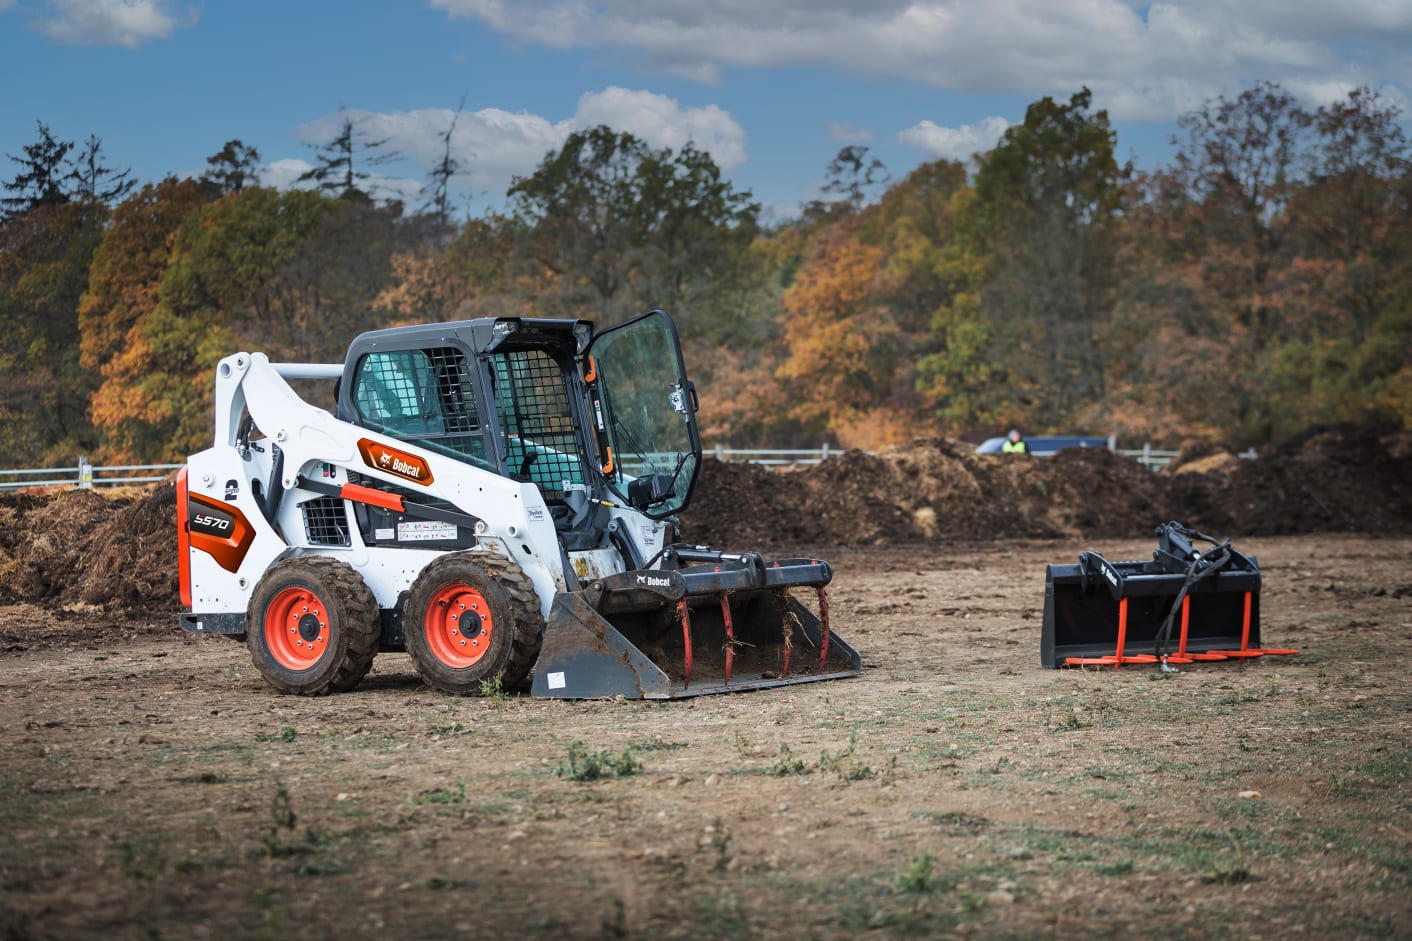 Browse Specs and more for the S570 Skid-Steer Loader - White Star Machinery